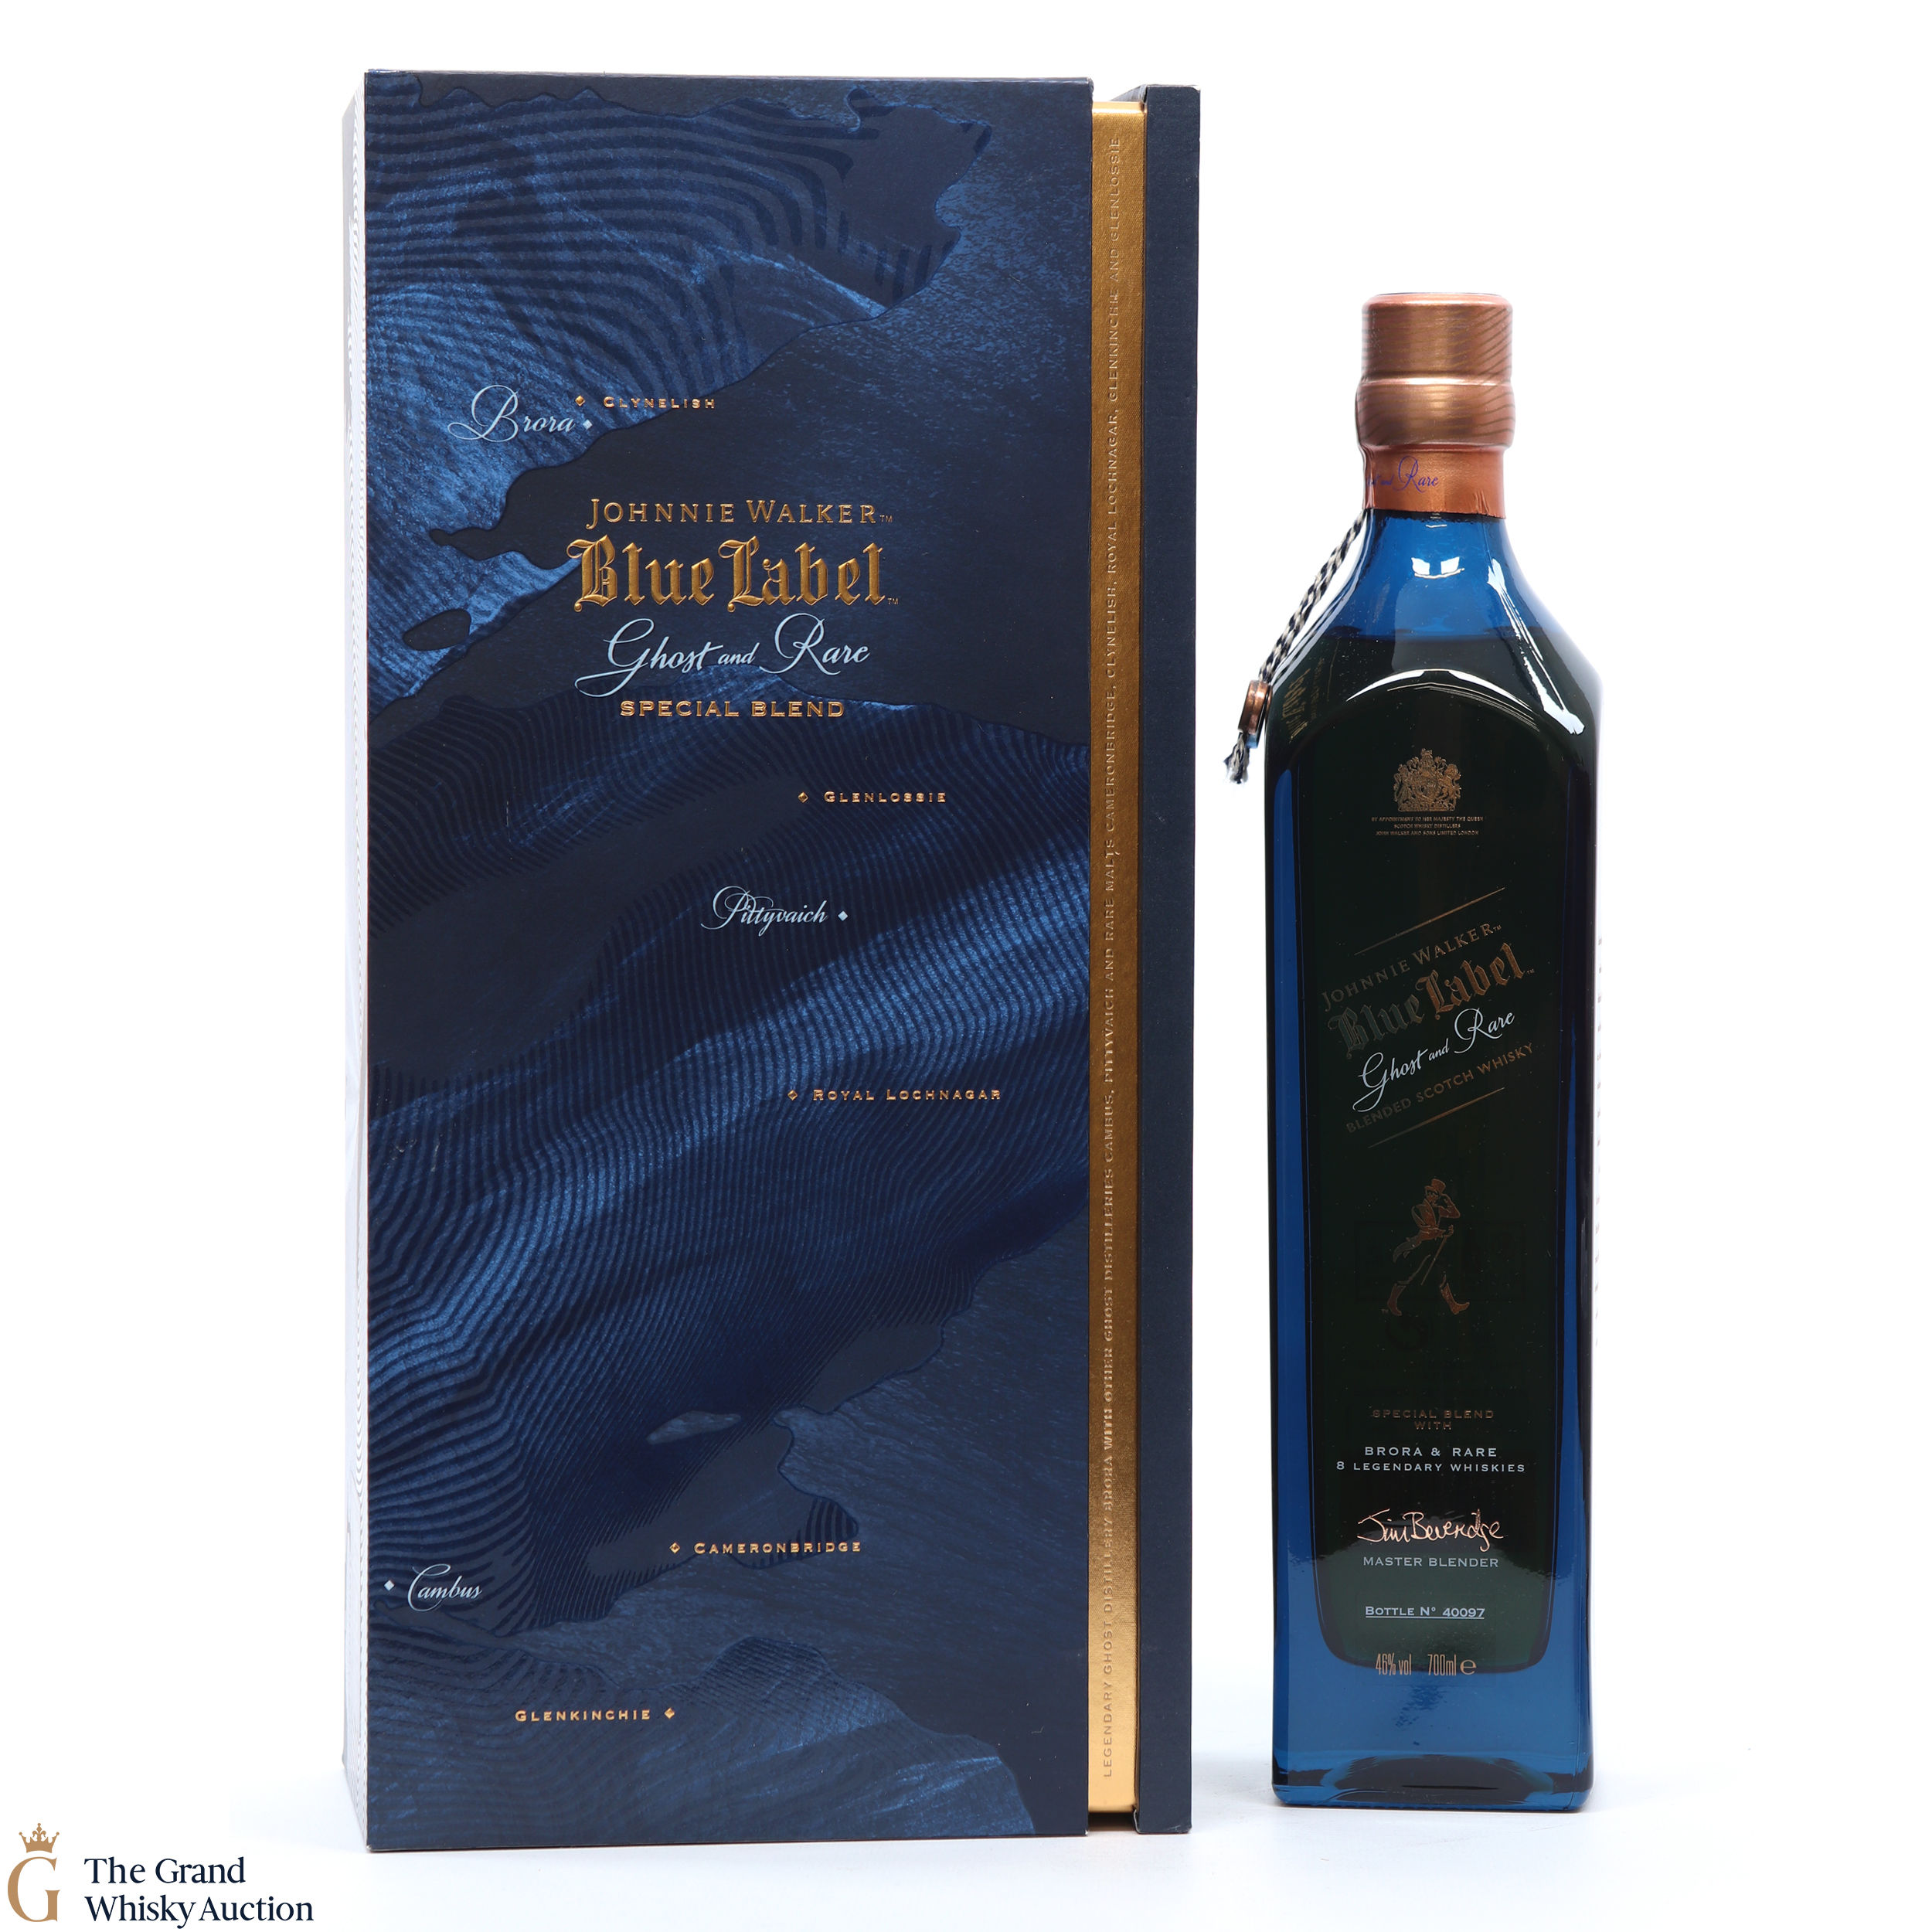 Johnnie Walker Blue Label Ghost And Rare Brora Auction The Grand Whisky Auction 5359